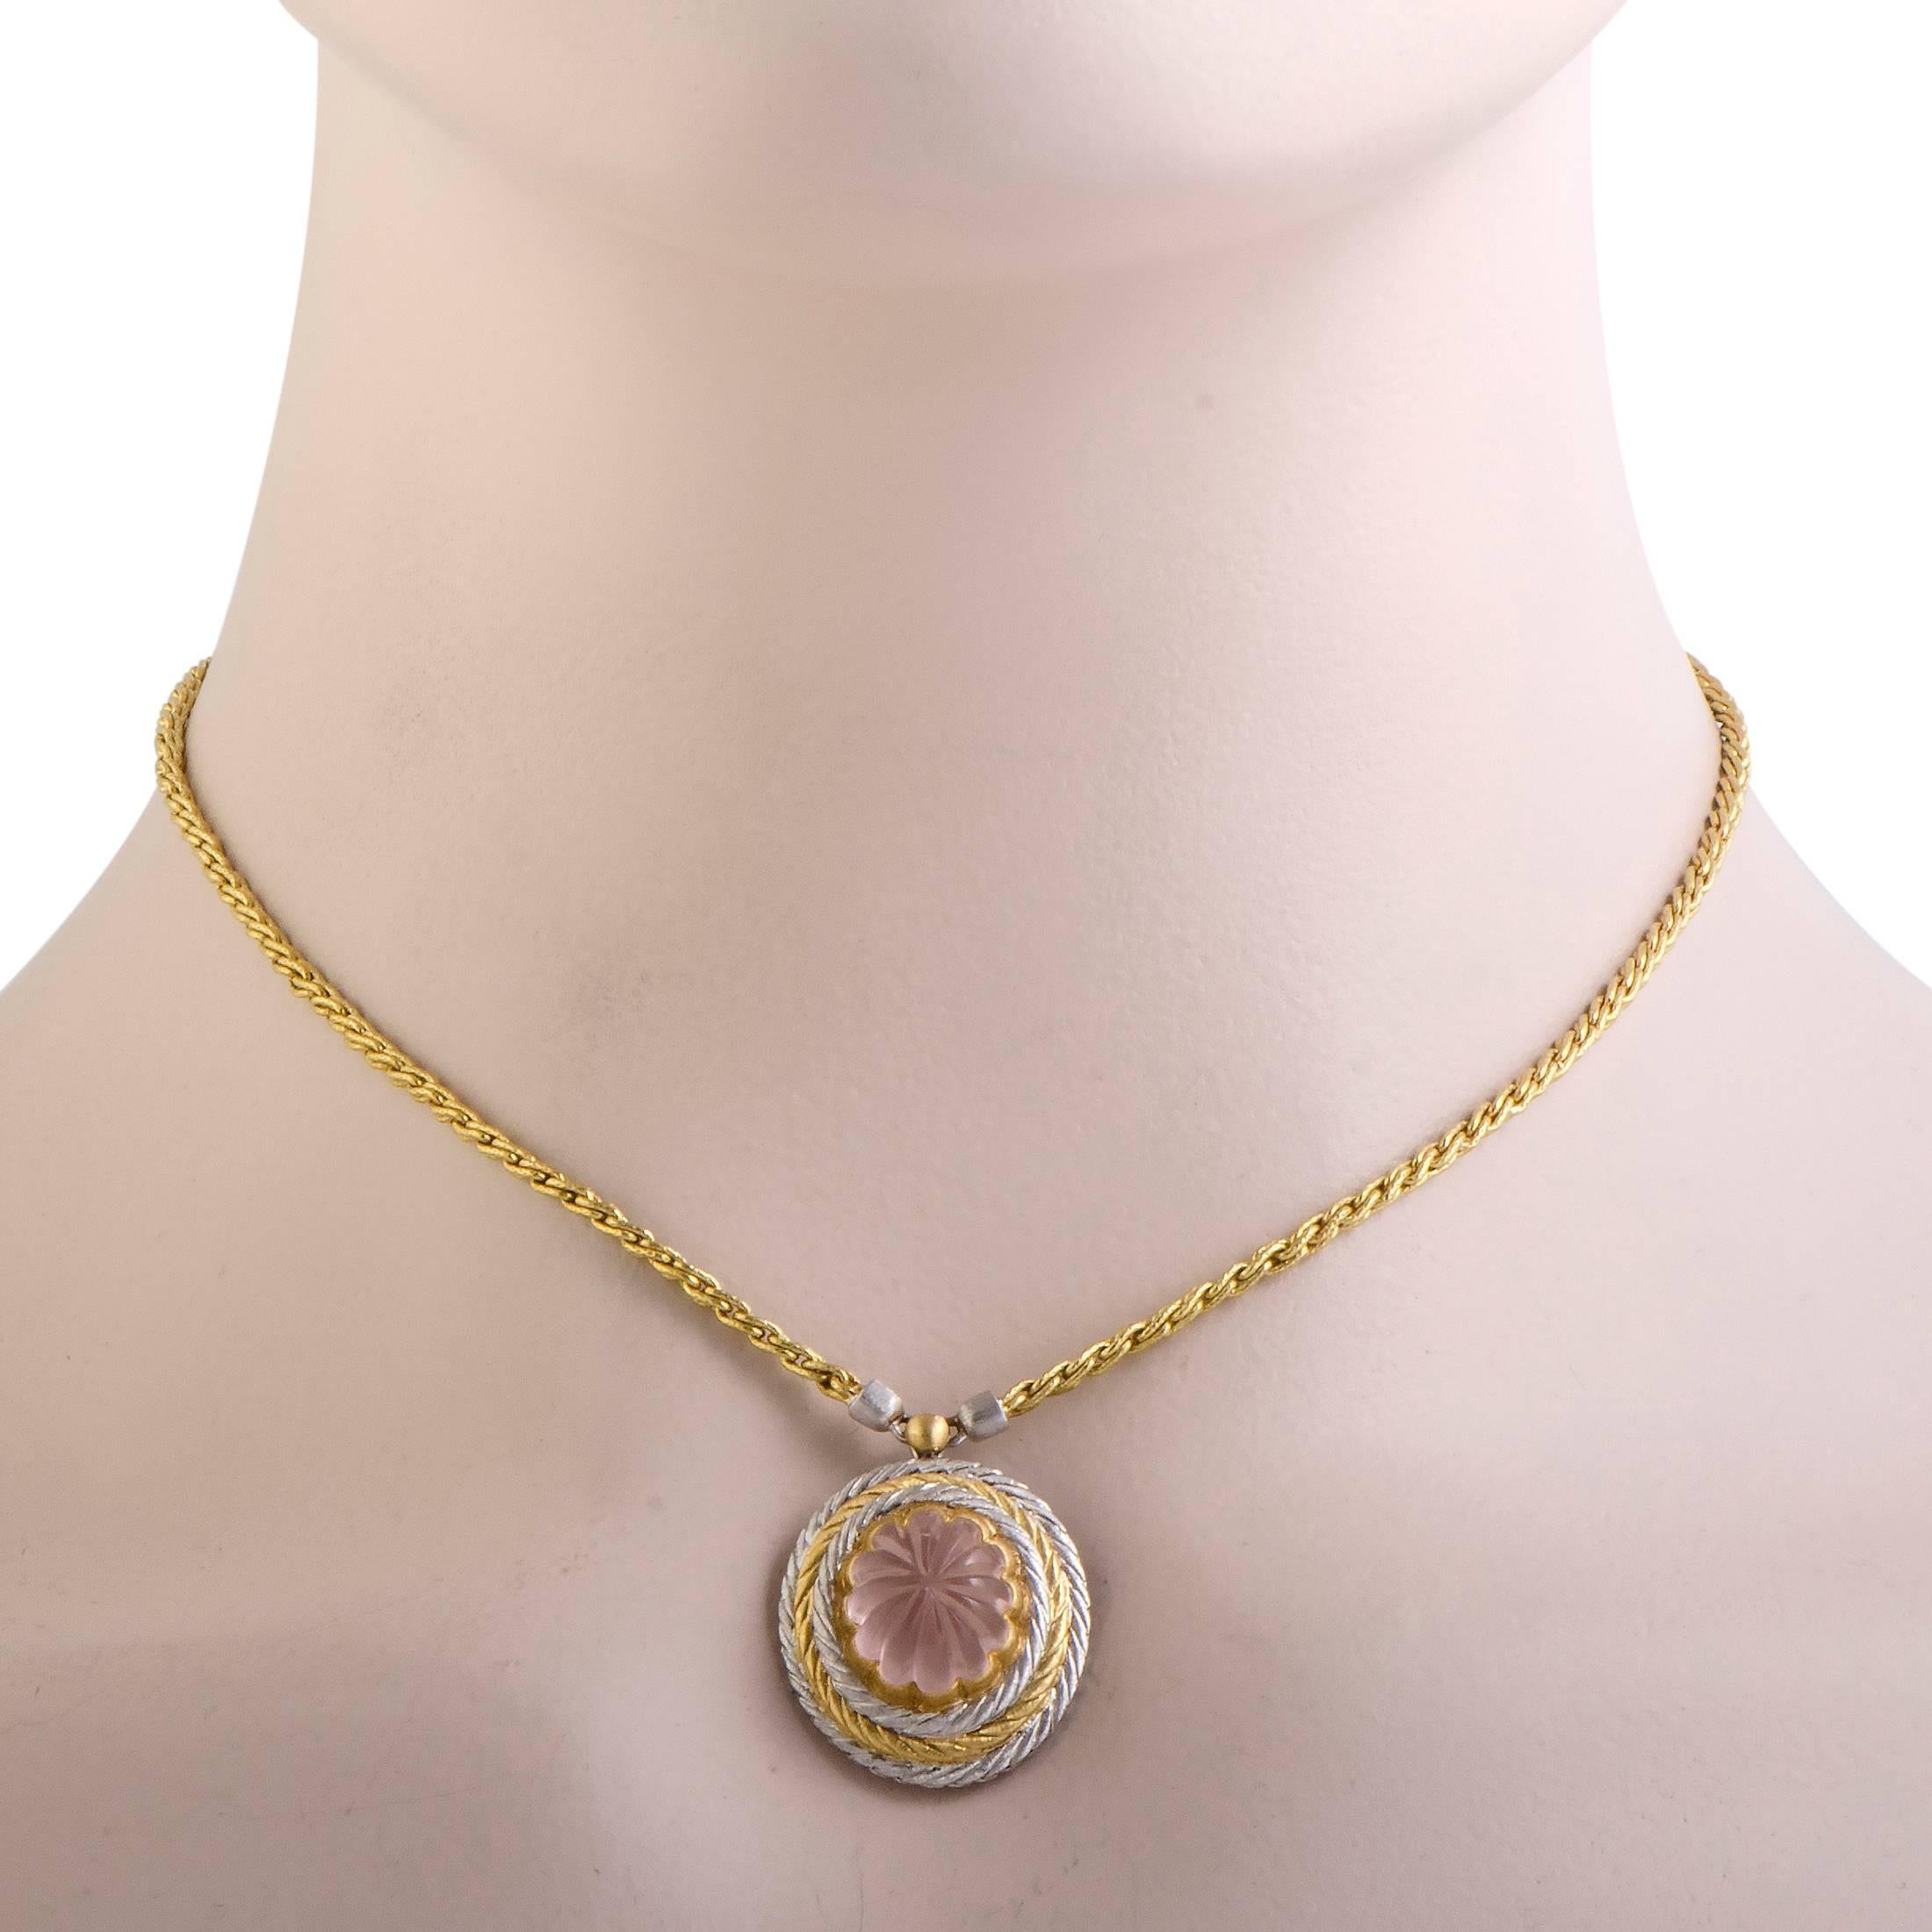 This lavish pendant necklace from Buccellati is rendered in a layering of yellow gold with white gold where two warm contrasting tones complement each other. It is topped with a scalloped tourmaline stone in a pastel shade of pink which looks very